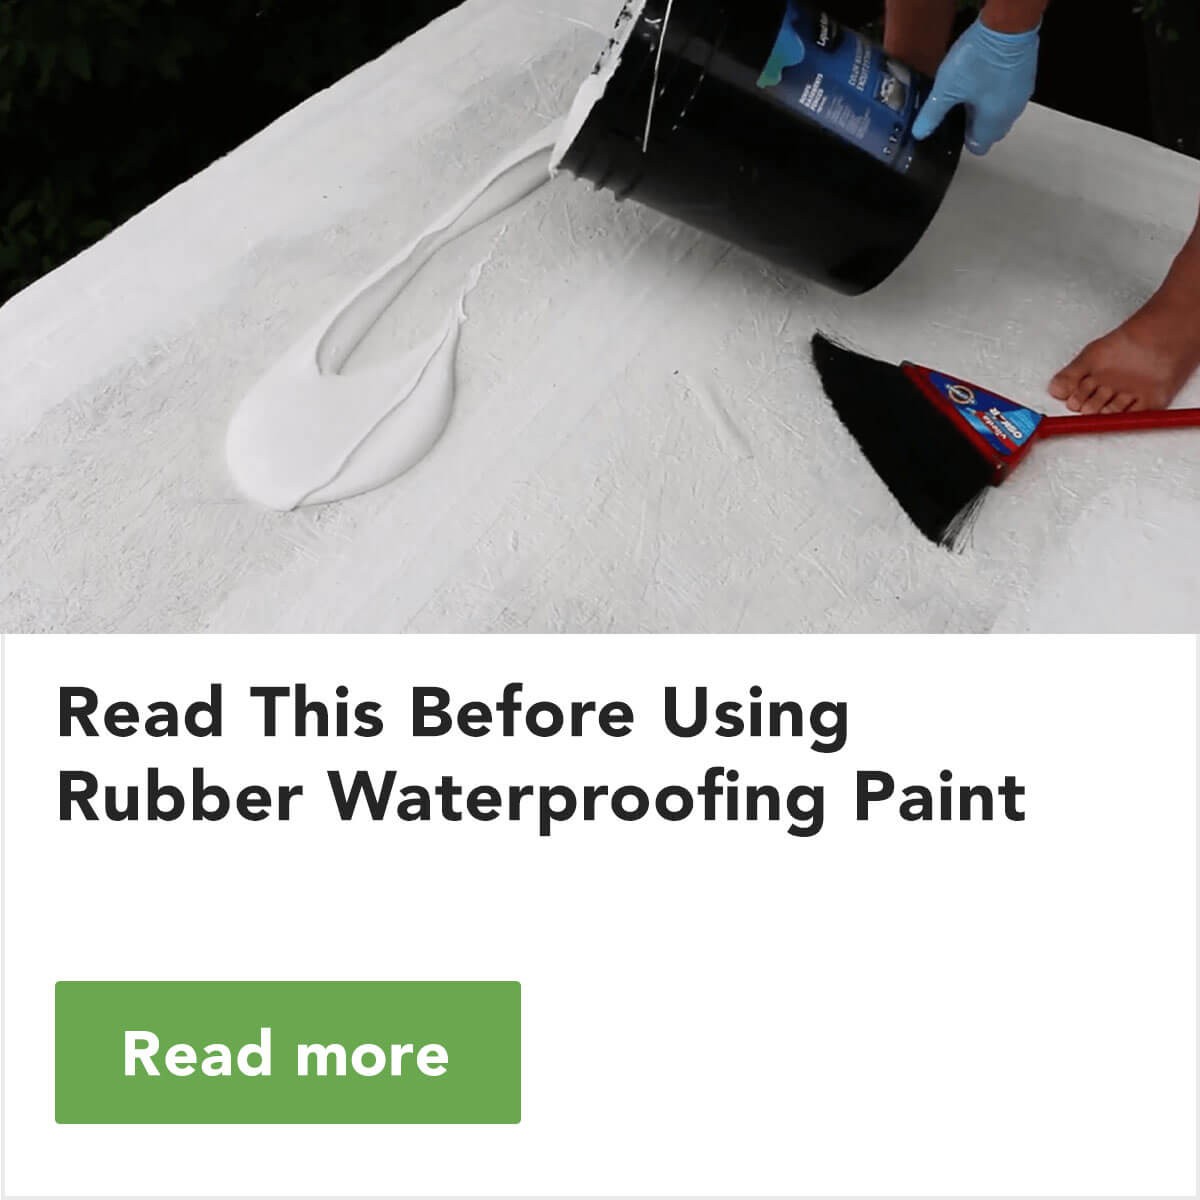 Nano-G What You Need To Know About Rubber Waterproofing Paint